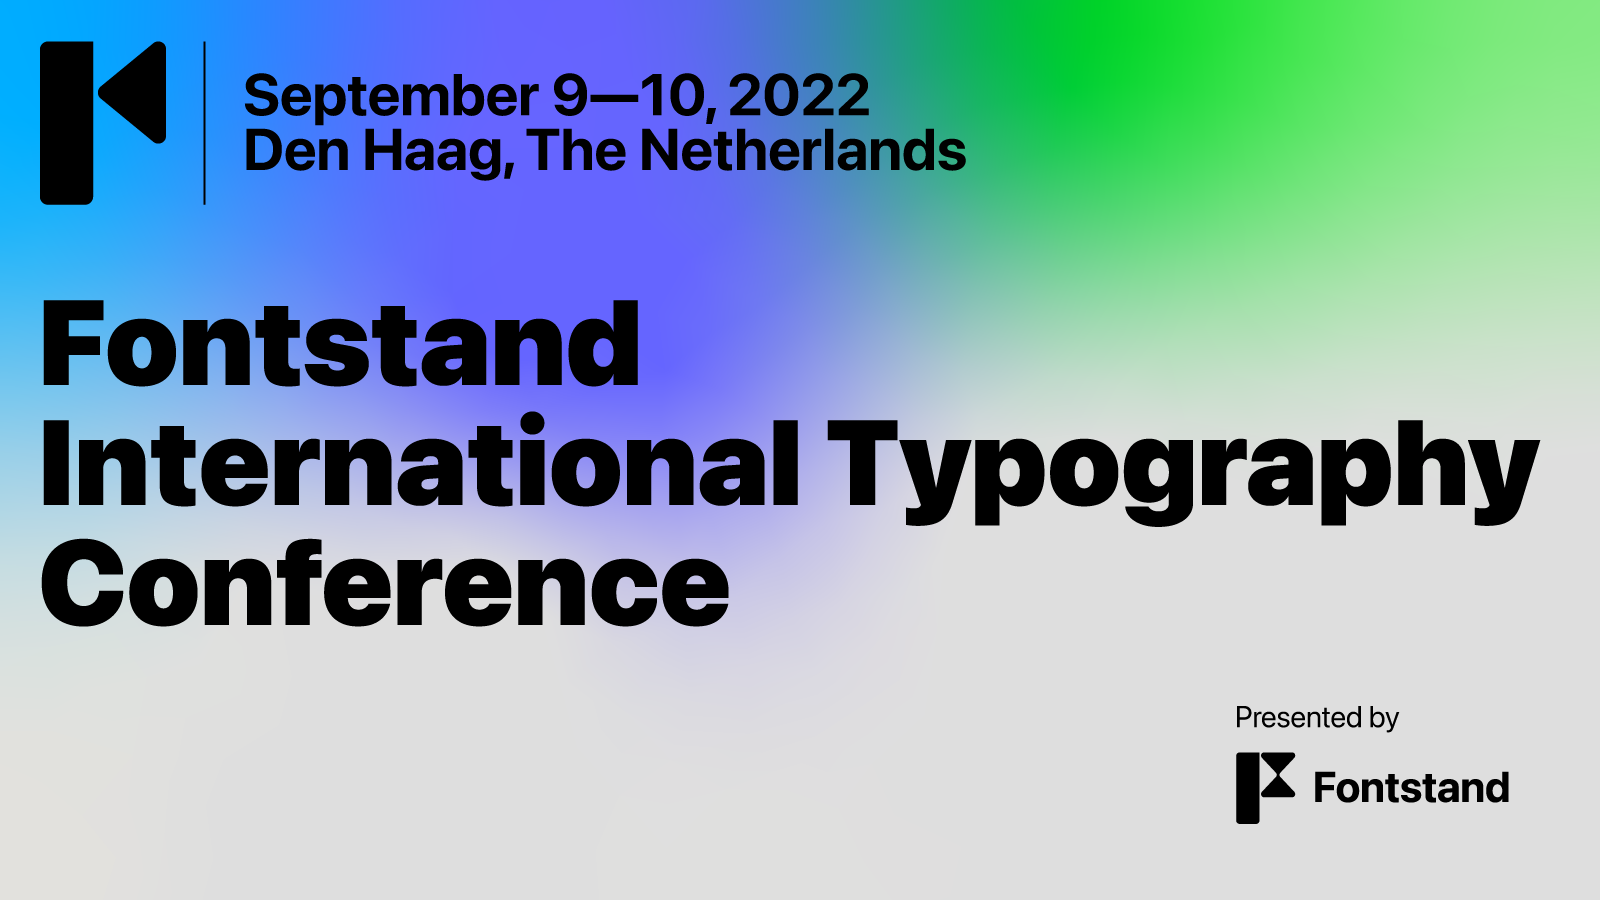 Fontstand International Typography Conference